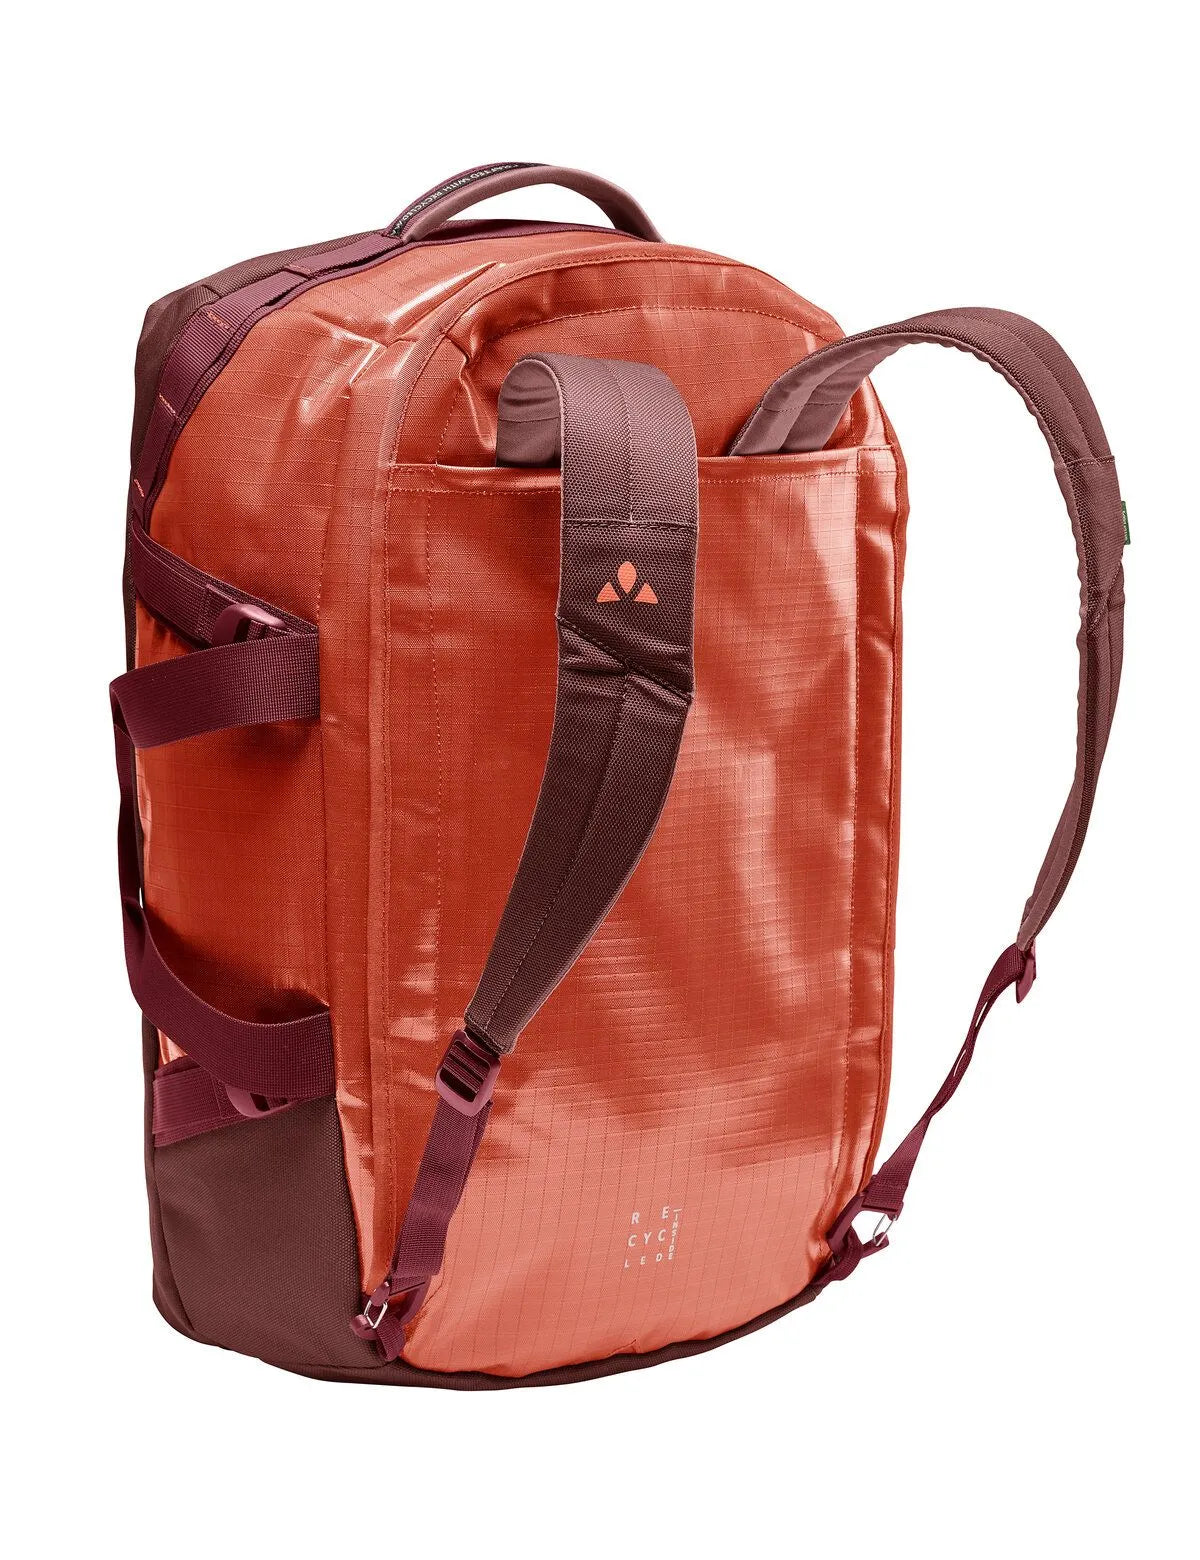 Vaude - CityDuffel 35l - Recycled Polyamide & Recycled Polyester - Weekendbee - sustainable sportswear